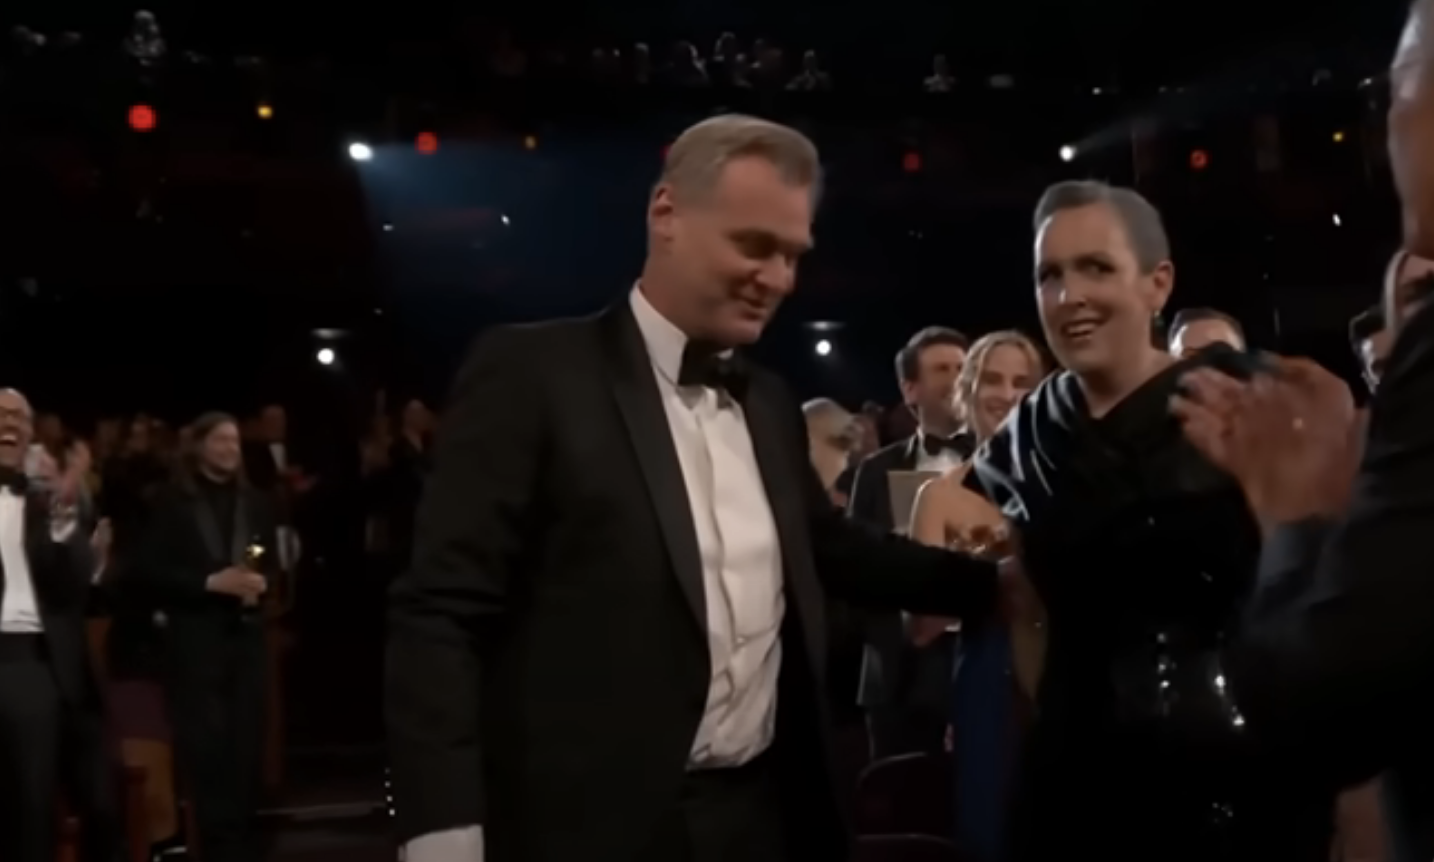 Christopher Nolan and Emma embracing in the audience, surrounded by applauding attendees